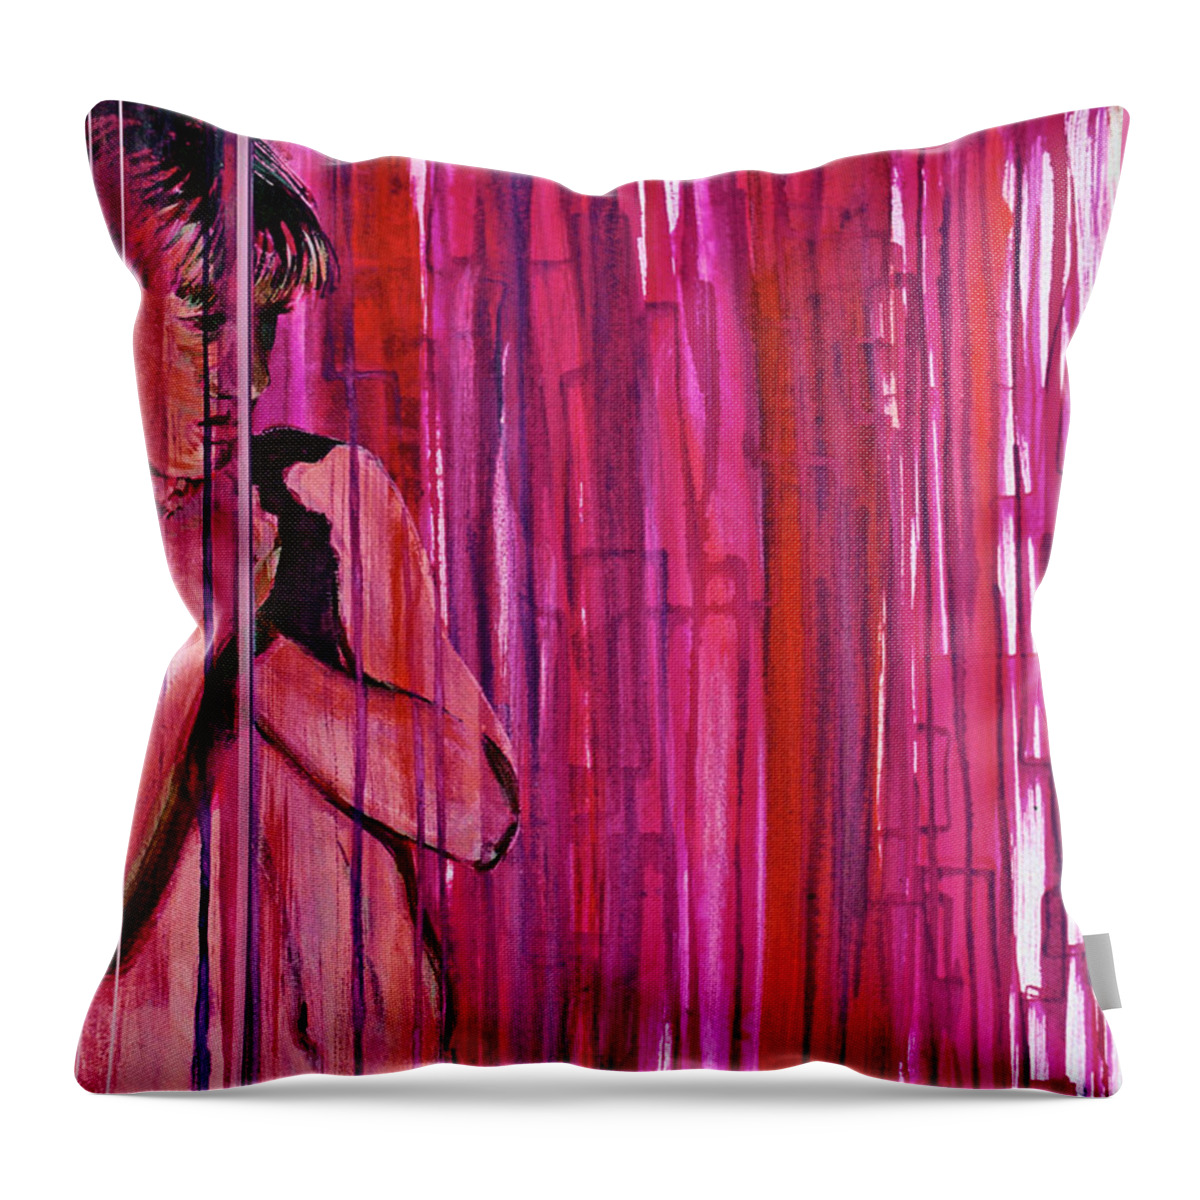 Nude Boy Throw Pillow featuring the painting Tremble by Rene Capone